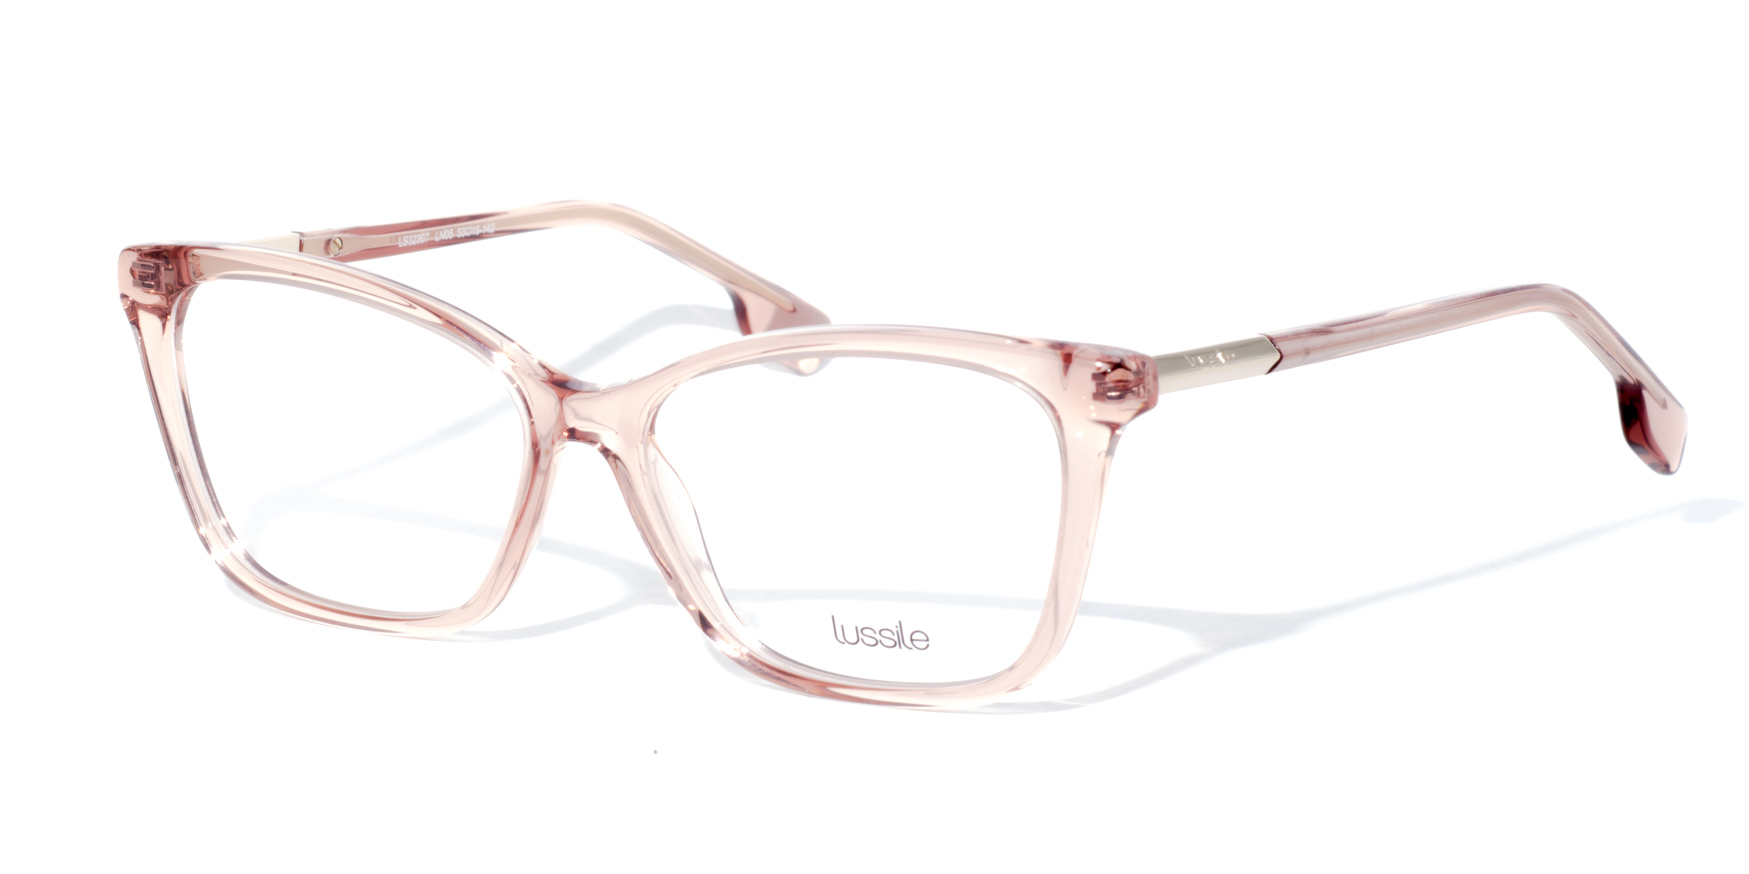 Lussile LS 32307